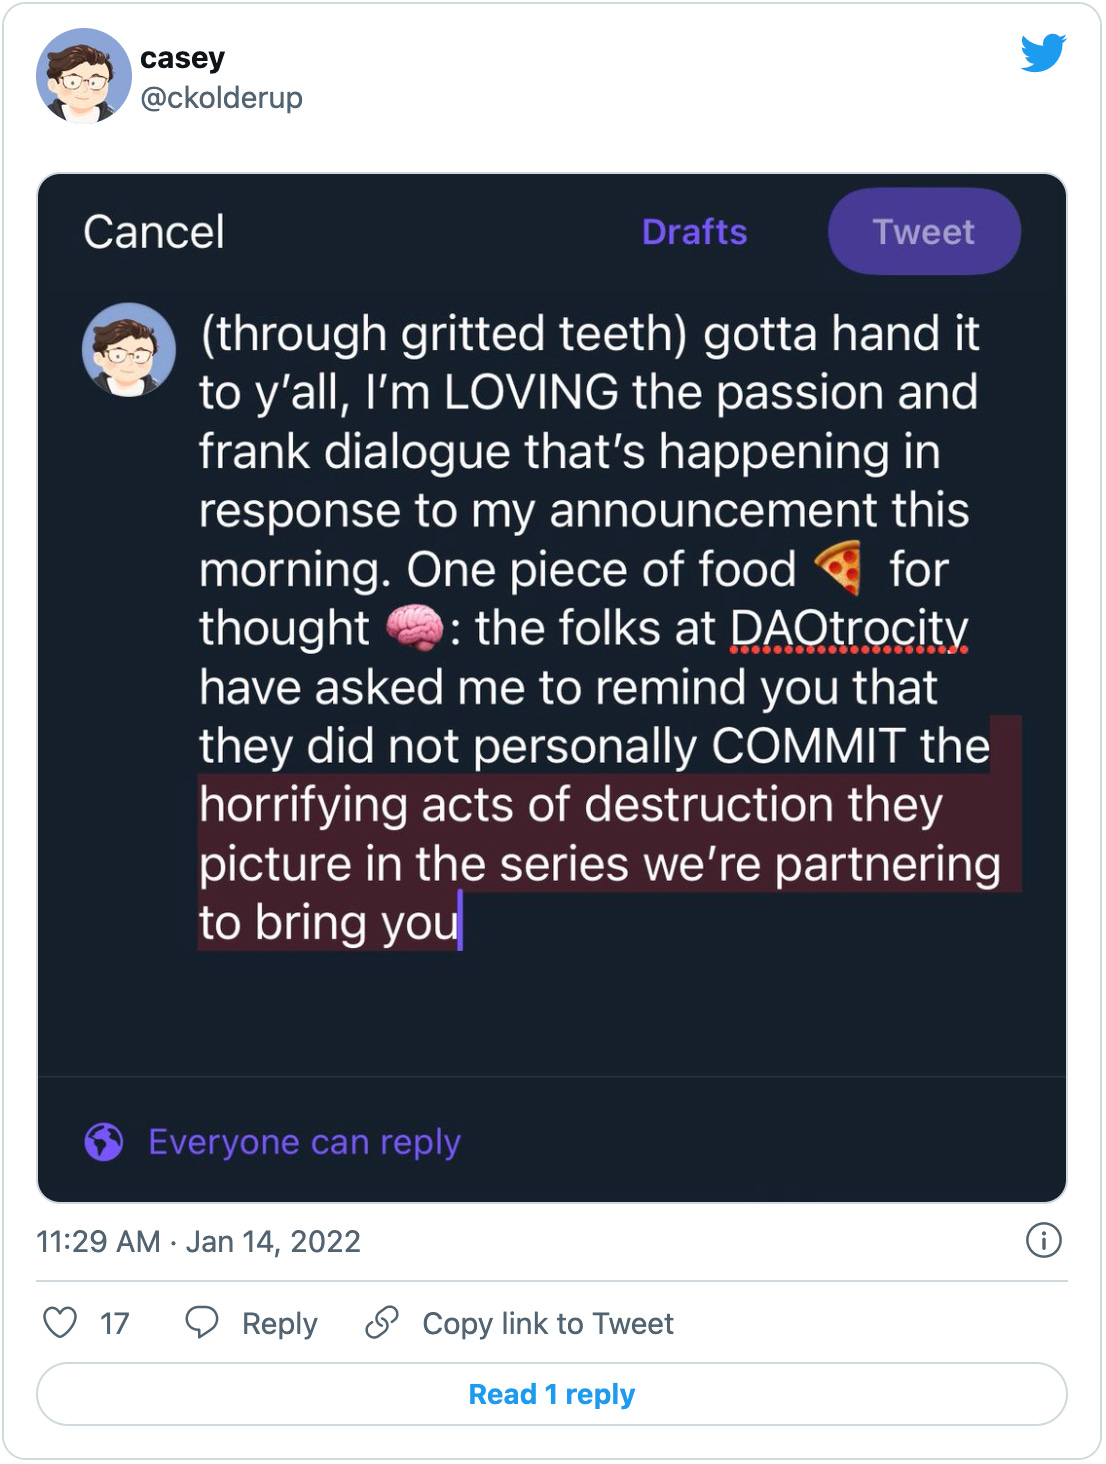 Tweet by @ckolderup with a screenshot of an over-length tweet compose form that reads: “(through gritted teeth) gotta hand it to y'all, I'm LOVING the passion and frank dialogue that's happening in response to my announcement this morning. One piece of food 🍕 for thought 🧠: the folks at DAOtrocity have asked me to remind you that they did not personally COMMIT the horrifying acts of destruction they picture in the series we're partnering to bring you”